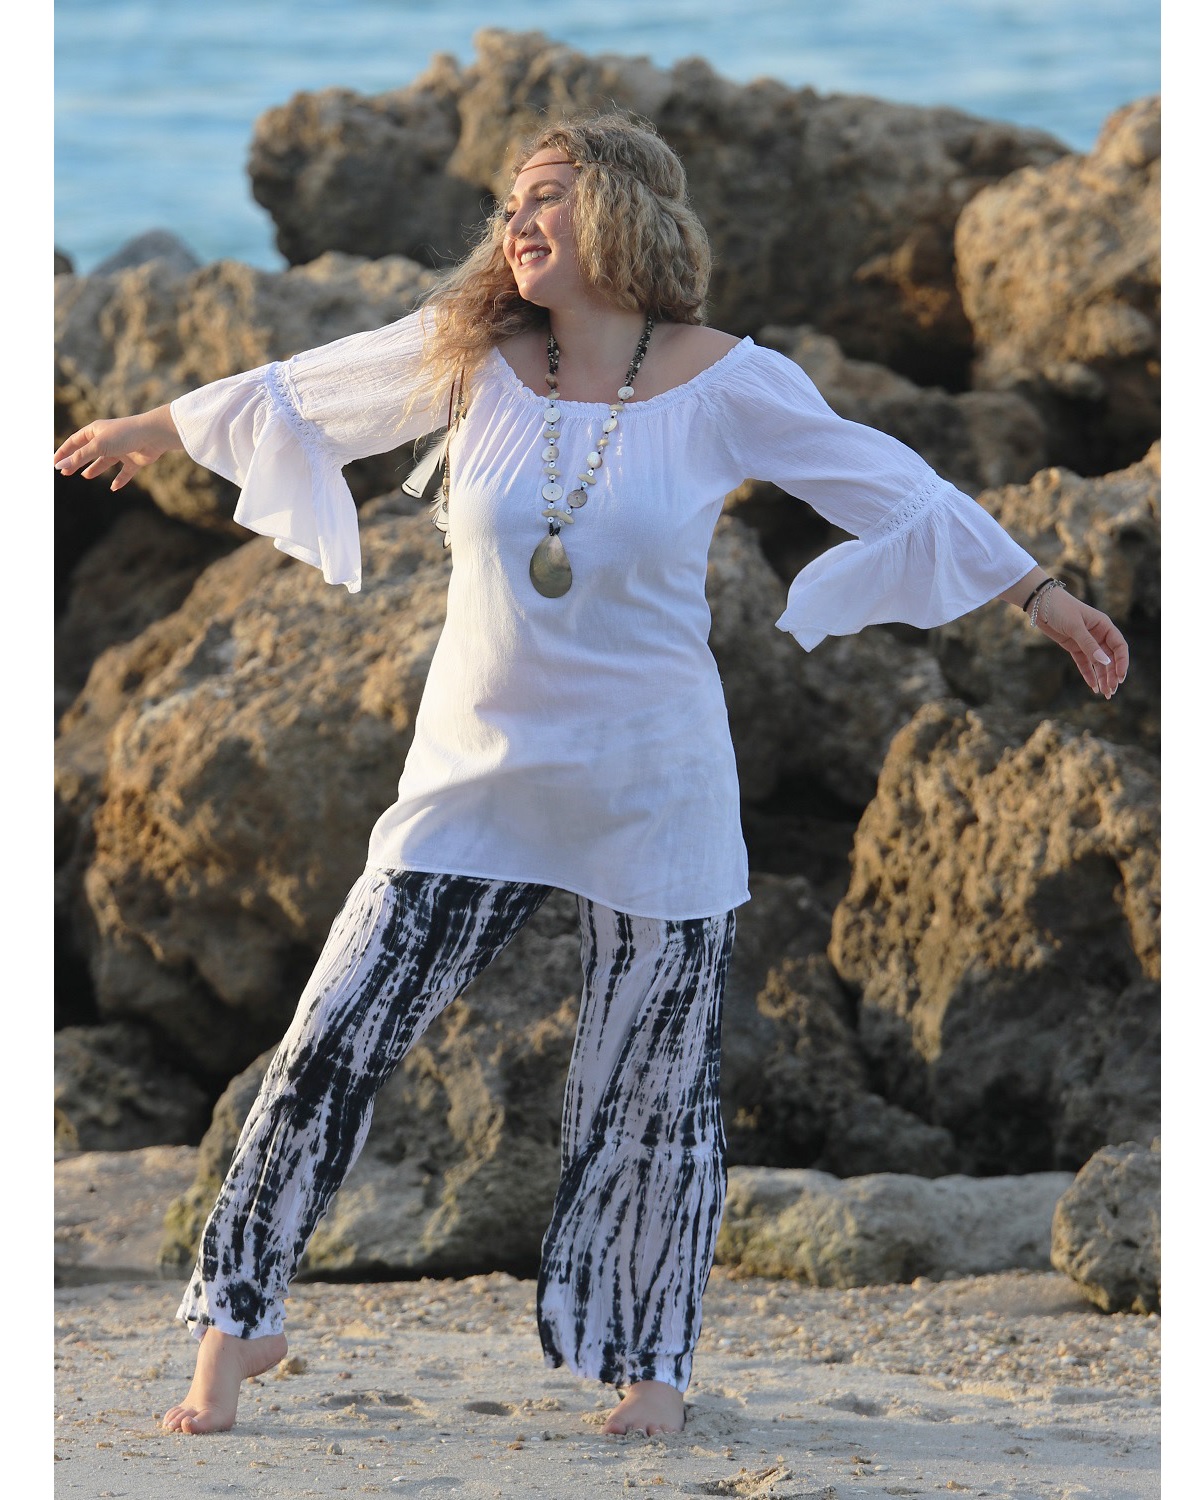 Boho – Chic-Blouse – Harmony – White – front view – model on beach – Out-stretched Arms